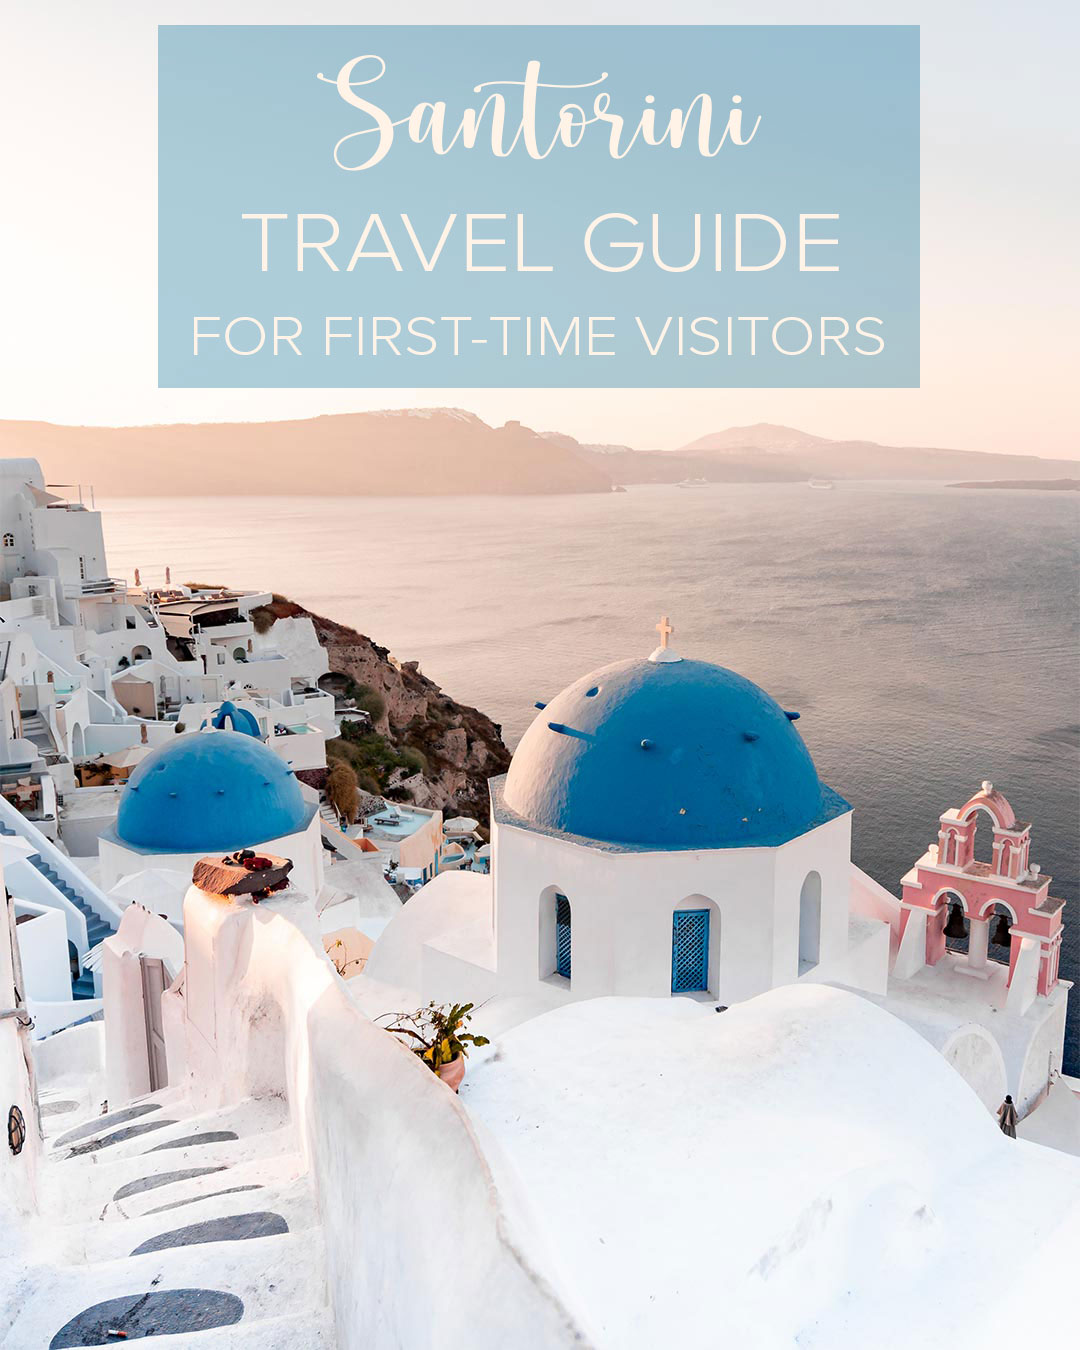 Santorini travel guide for first-time visitors